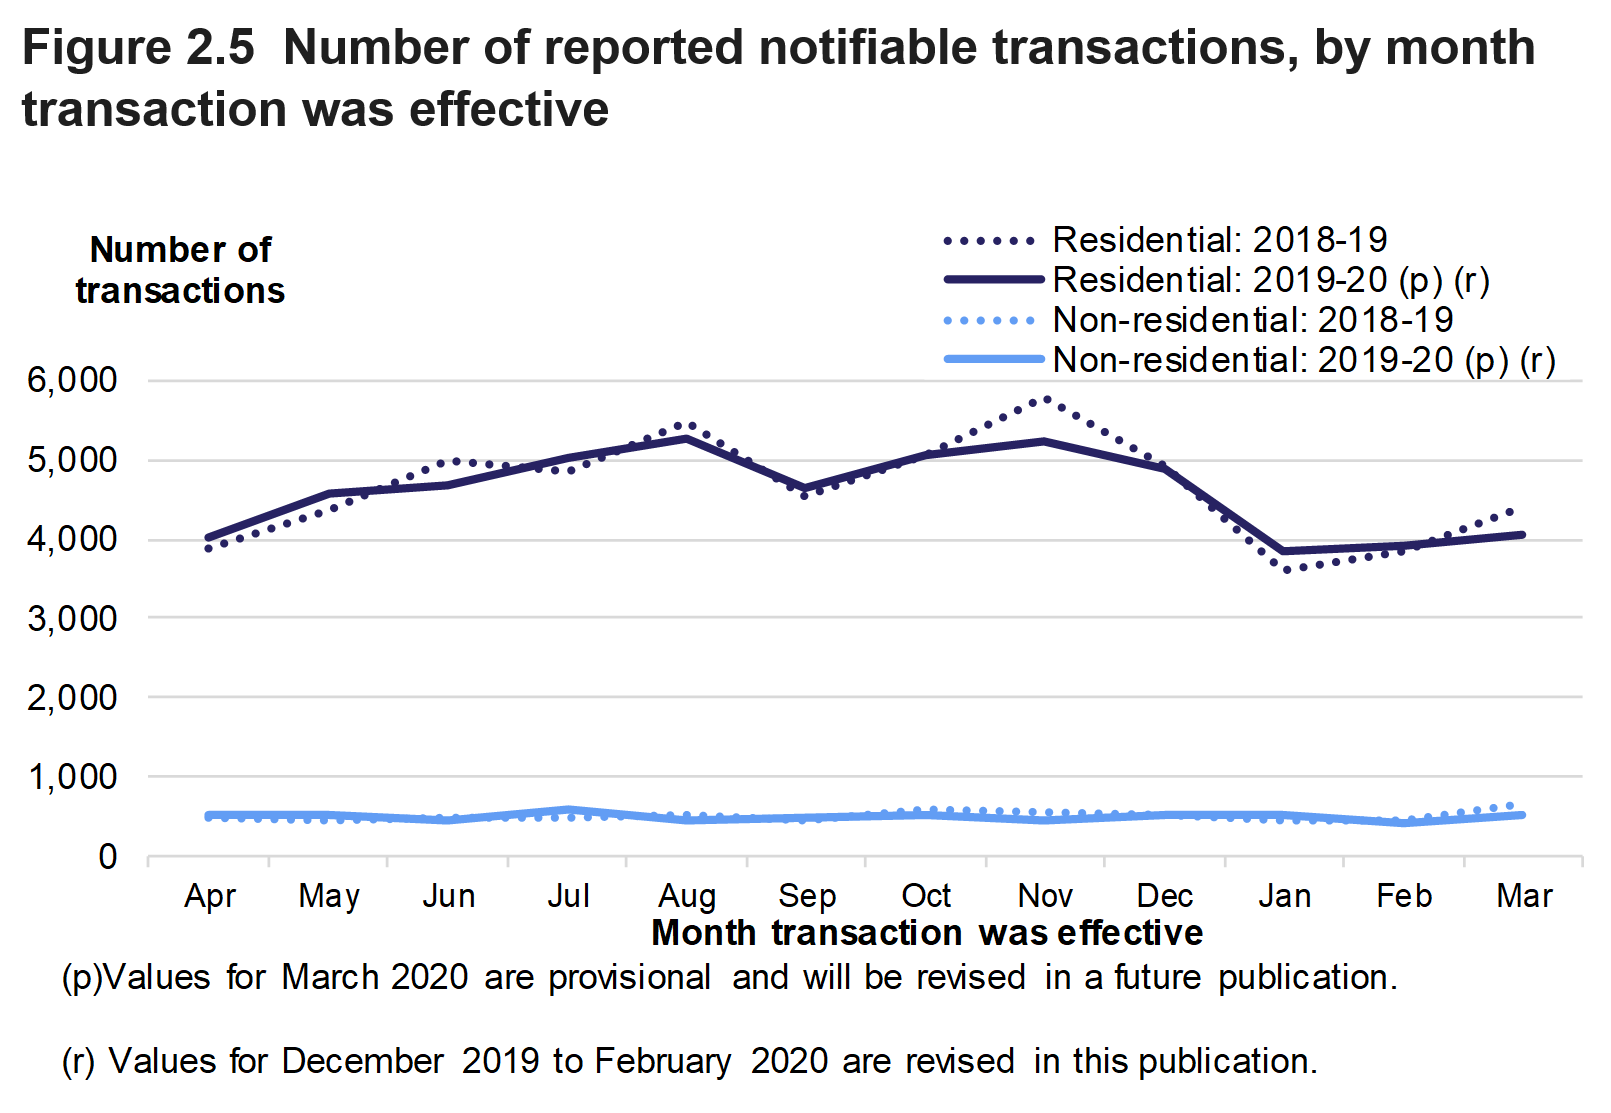 Figure 2.5 shows the monthly numbers of reported notifiable transactions from April 2018 to March 2020, for residential and non-residential transactions.